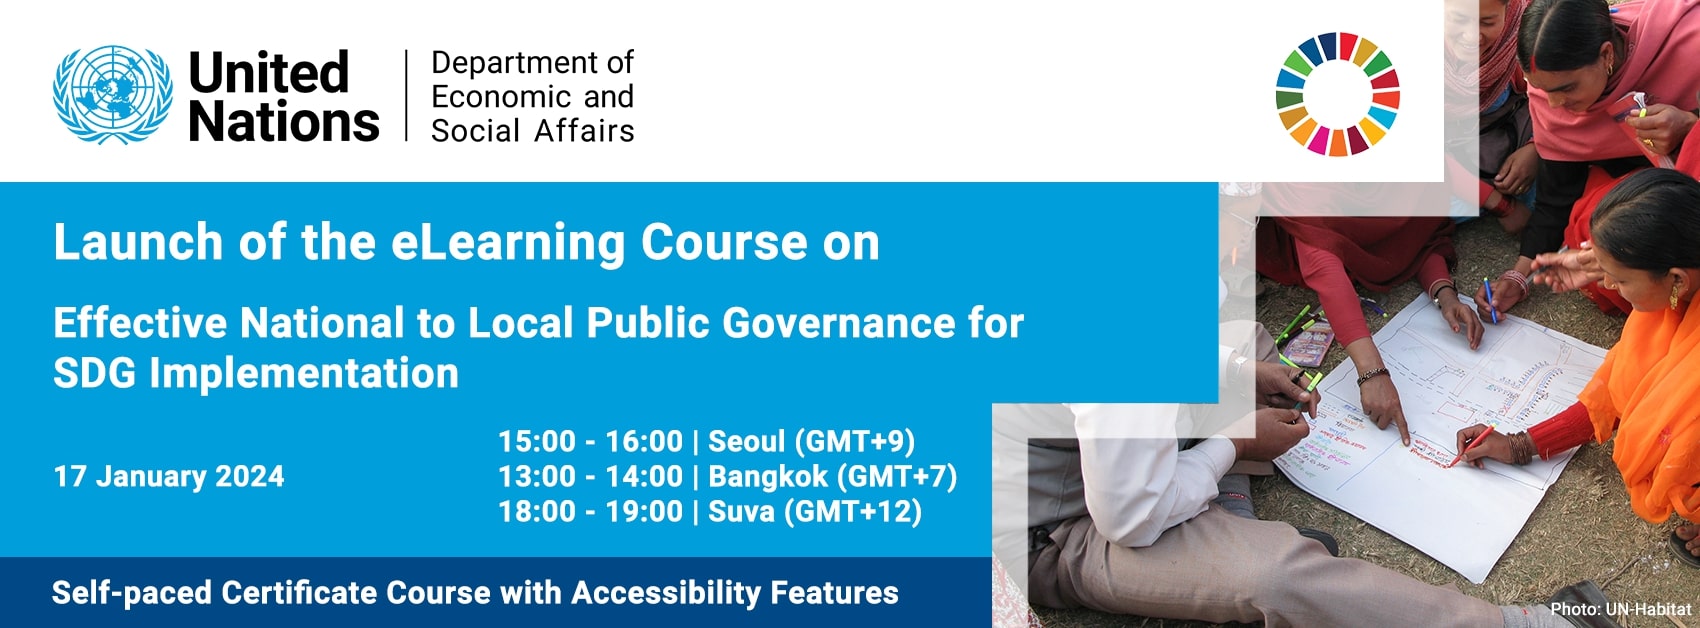 Launch of the eLearning Course on Effective National to Local Public Governance for SDG Implementation